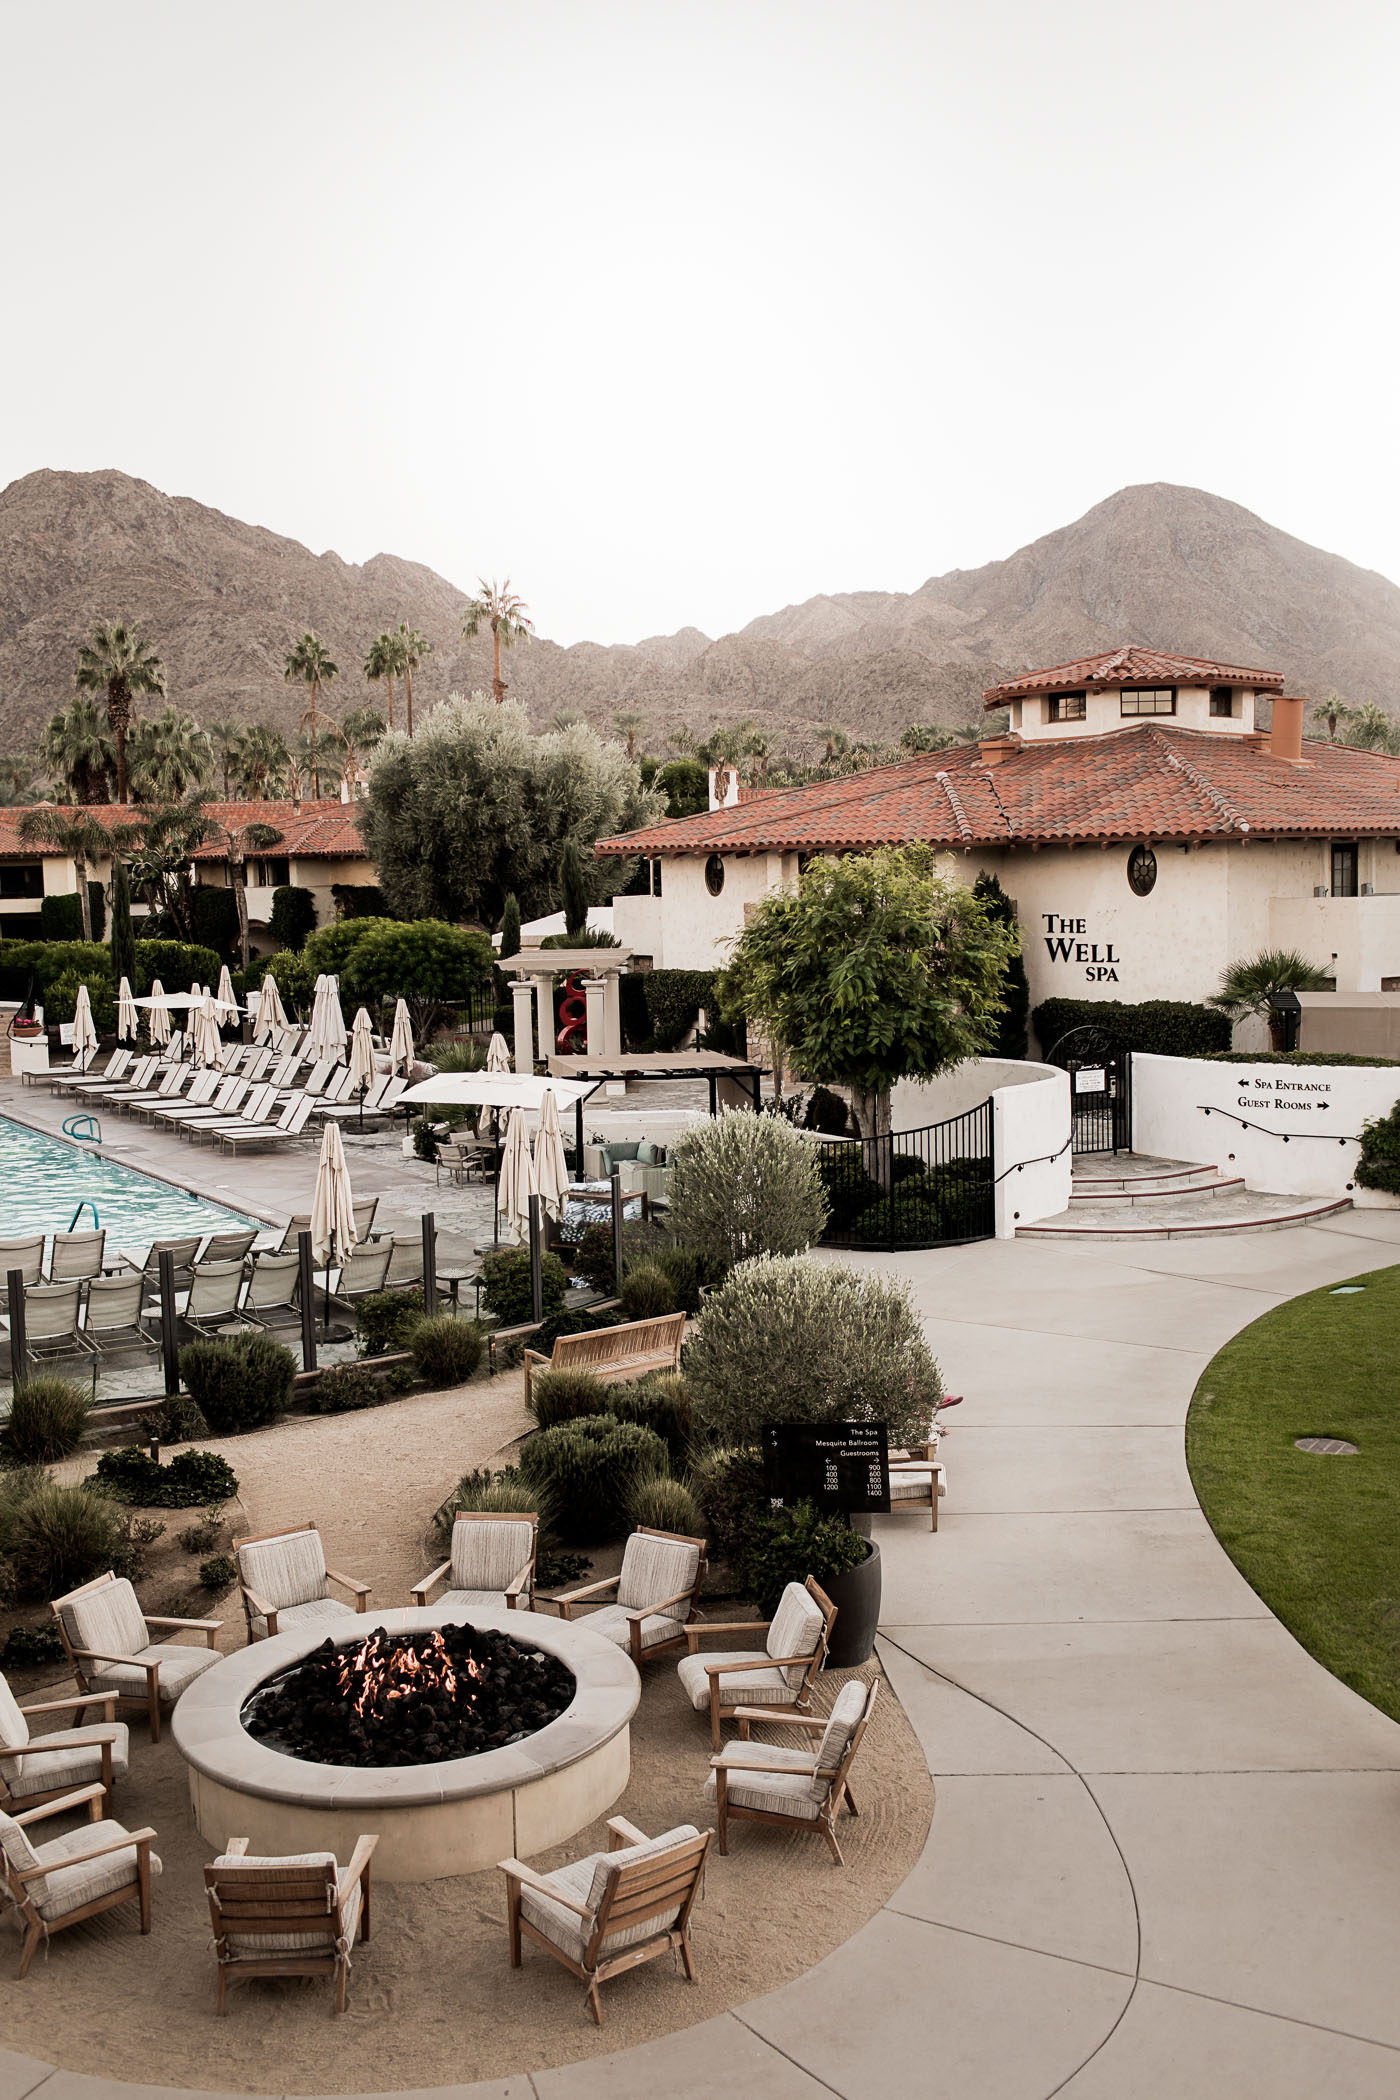 Where to stay for 3 days in Greater Palm Springs - Miramonte Resort & Spa in Indian Wells